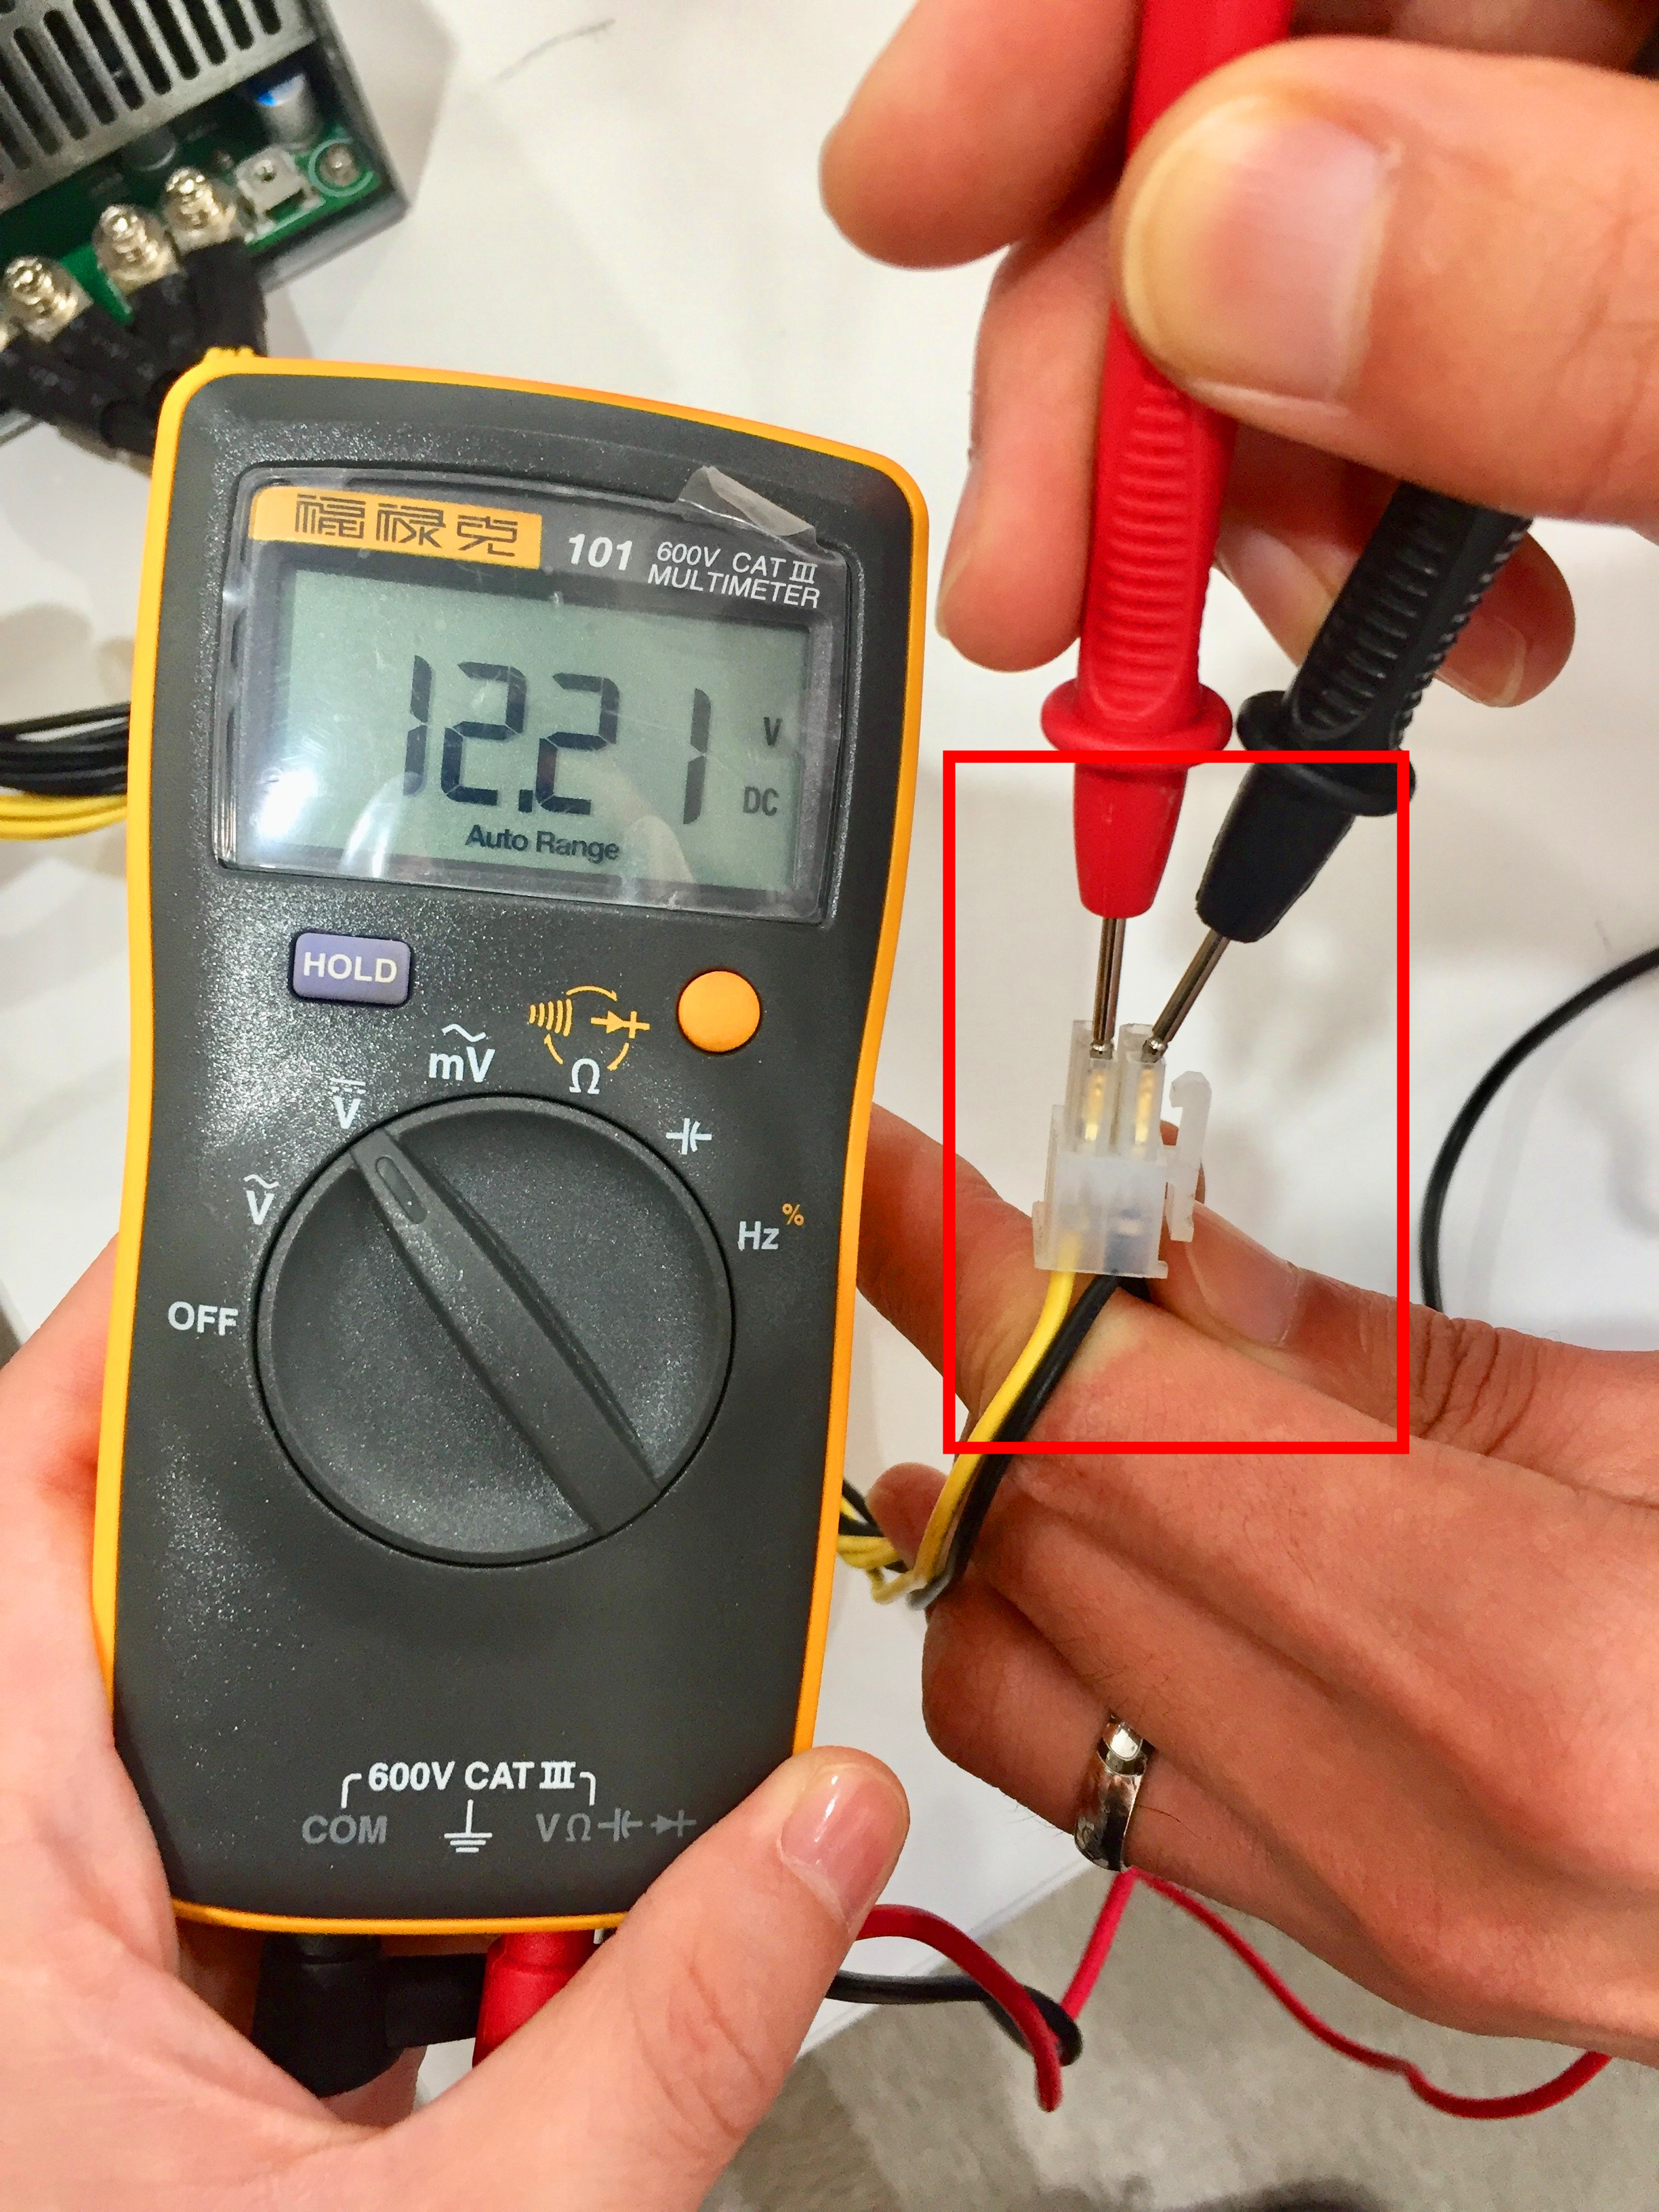 Multimeter To Test Psu Bitmain, How To Test House Wiring For Power Supply With Multimeter